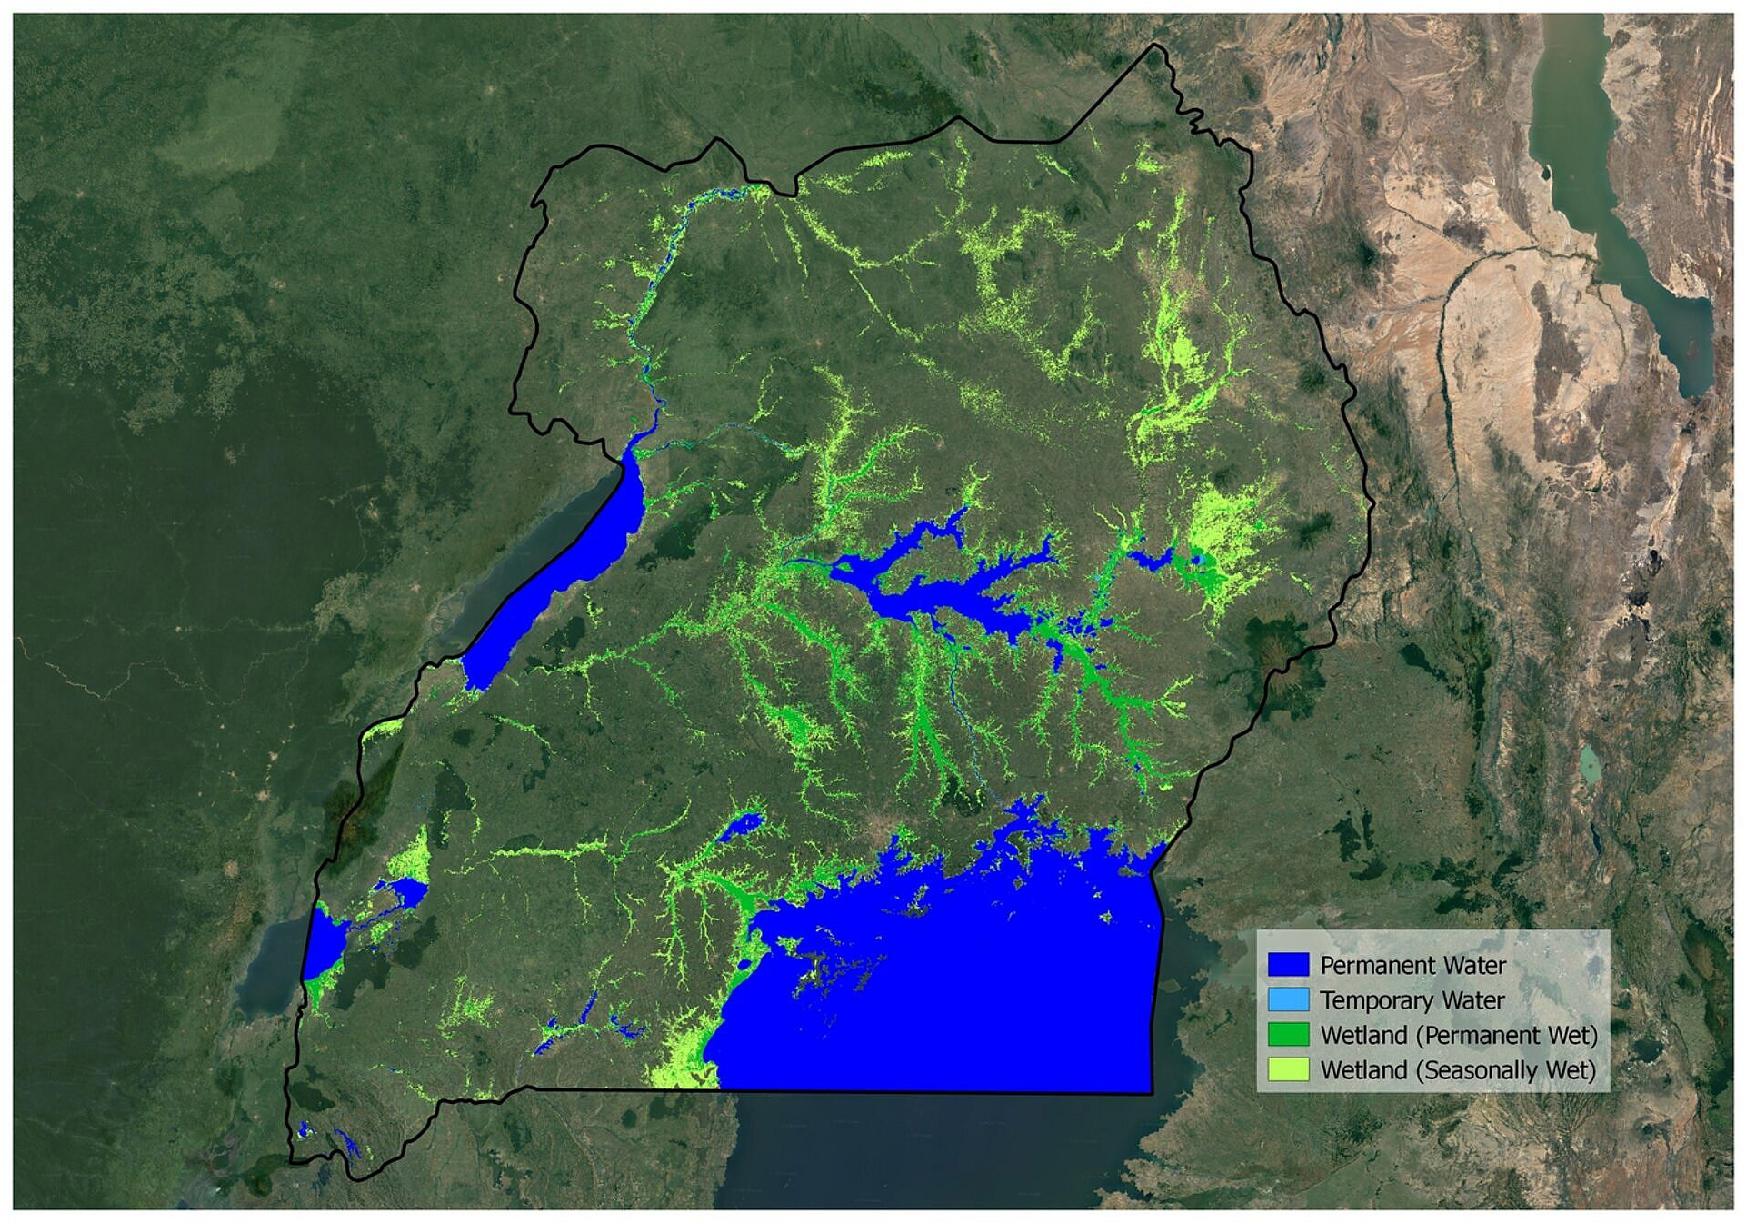 Figure 6: Map showing the wetlands of Uganda overlaid on GoogleEarth images. Dark blue shows permanent water bodies while temporary water is visible in light blue. Dark and light green areas depict wetland areas which are permanently and seasonally wet, respectively. The map has been produced using a hybrid sensor approach that combines optical and radar observations using data from the Copernicus Sentinel-1 and Sentinel-2 missions, as well as data from the US Landsat mission, from 2016-17. The maps can be used to accurately monitor the dynamics of water and wetland areas in Uganda. (image credit: ESA, the map contains modified Copernicus Sentinel data (2016-17), ESA GlobWetland Africa, Global Partnership for Sustainable Development Data, GeoVille Information Systems)